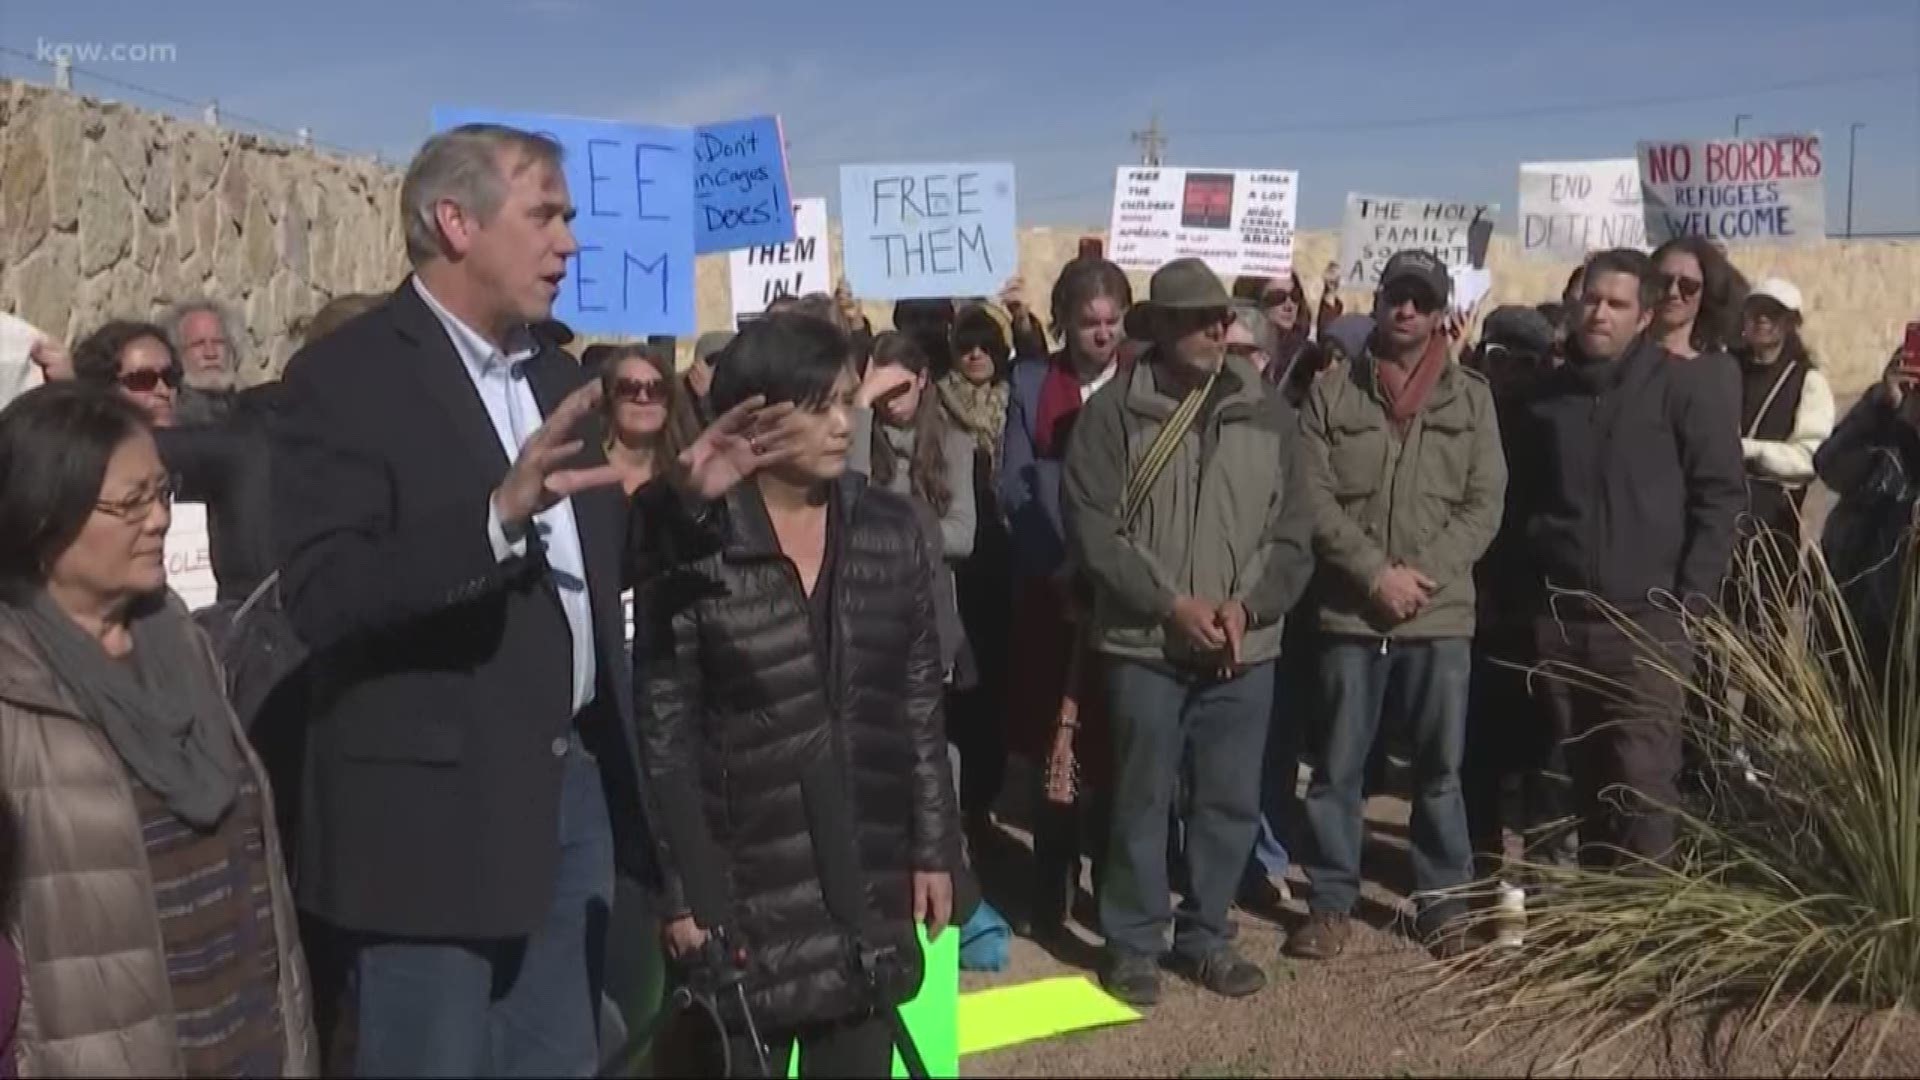 Sen. Jeff Merkley and four other Democratic members of Congress toured a remote tent city in West Texas.